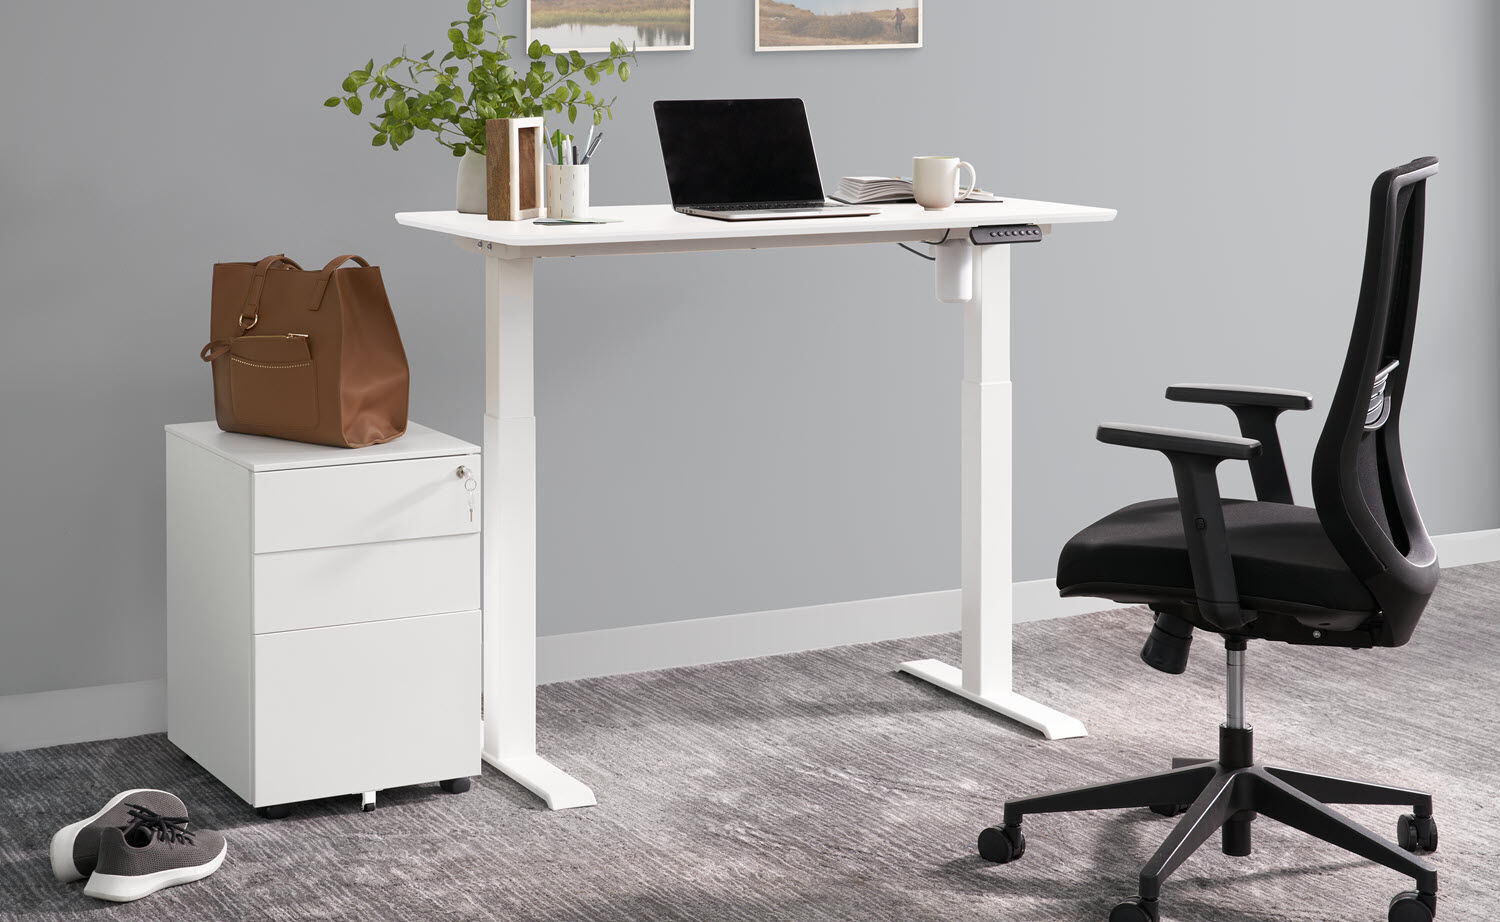 essential electric standing desk 48 by 24 in white paired with an essential file cabinet in white and essential task chair setup in home officed